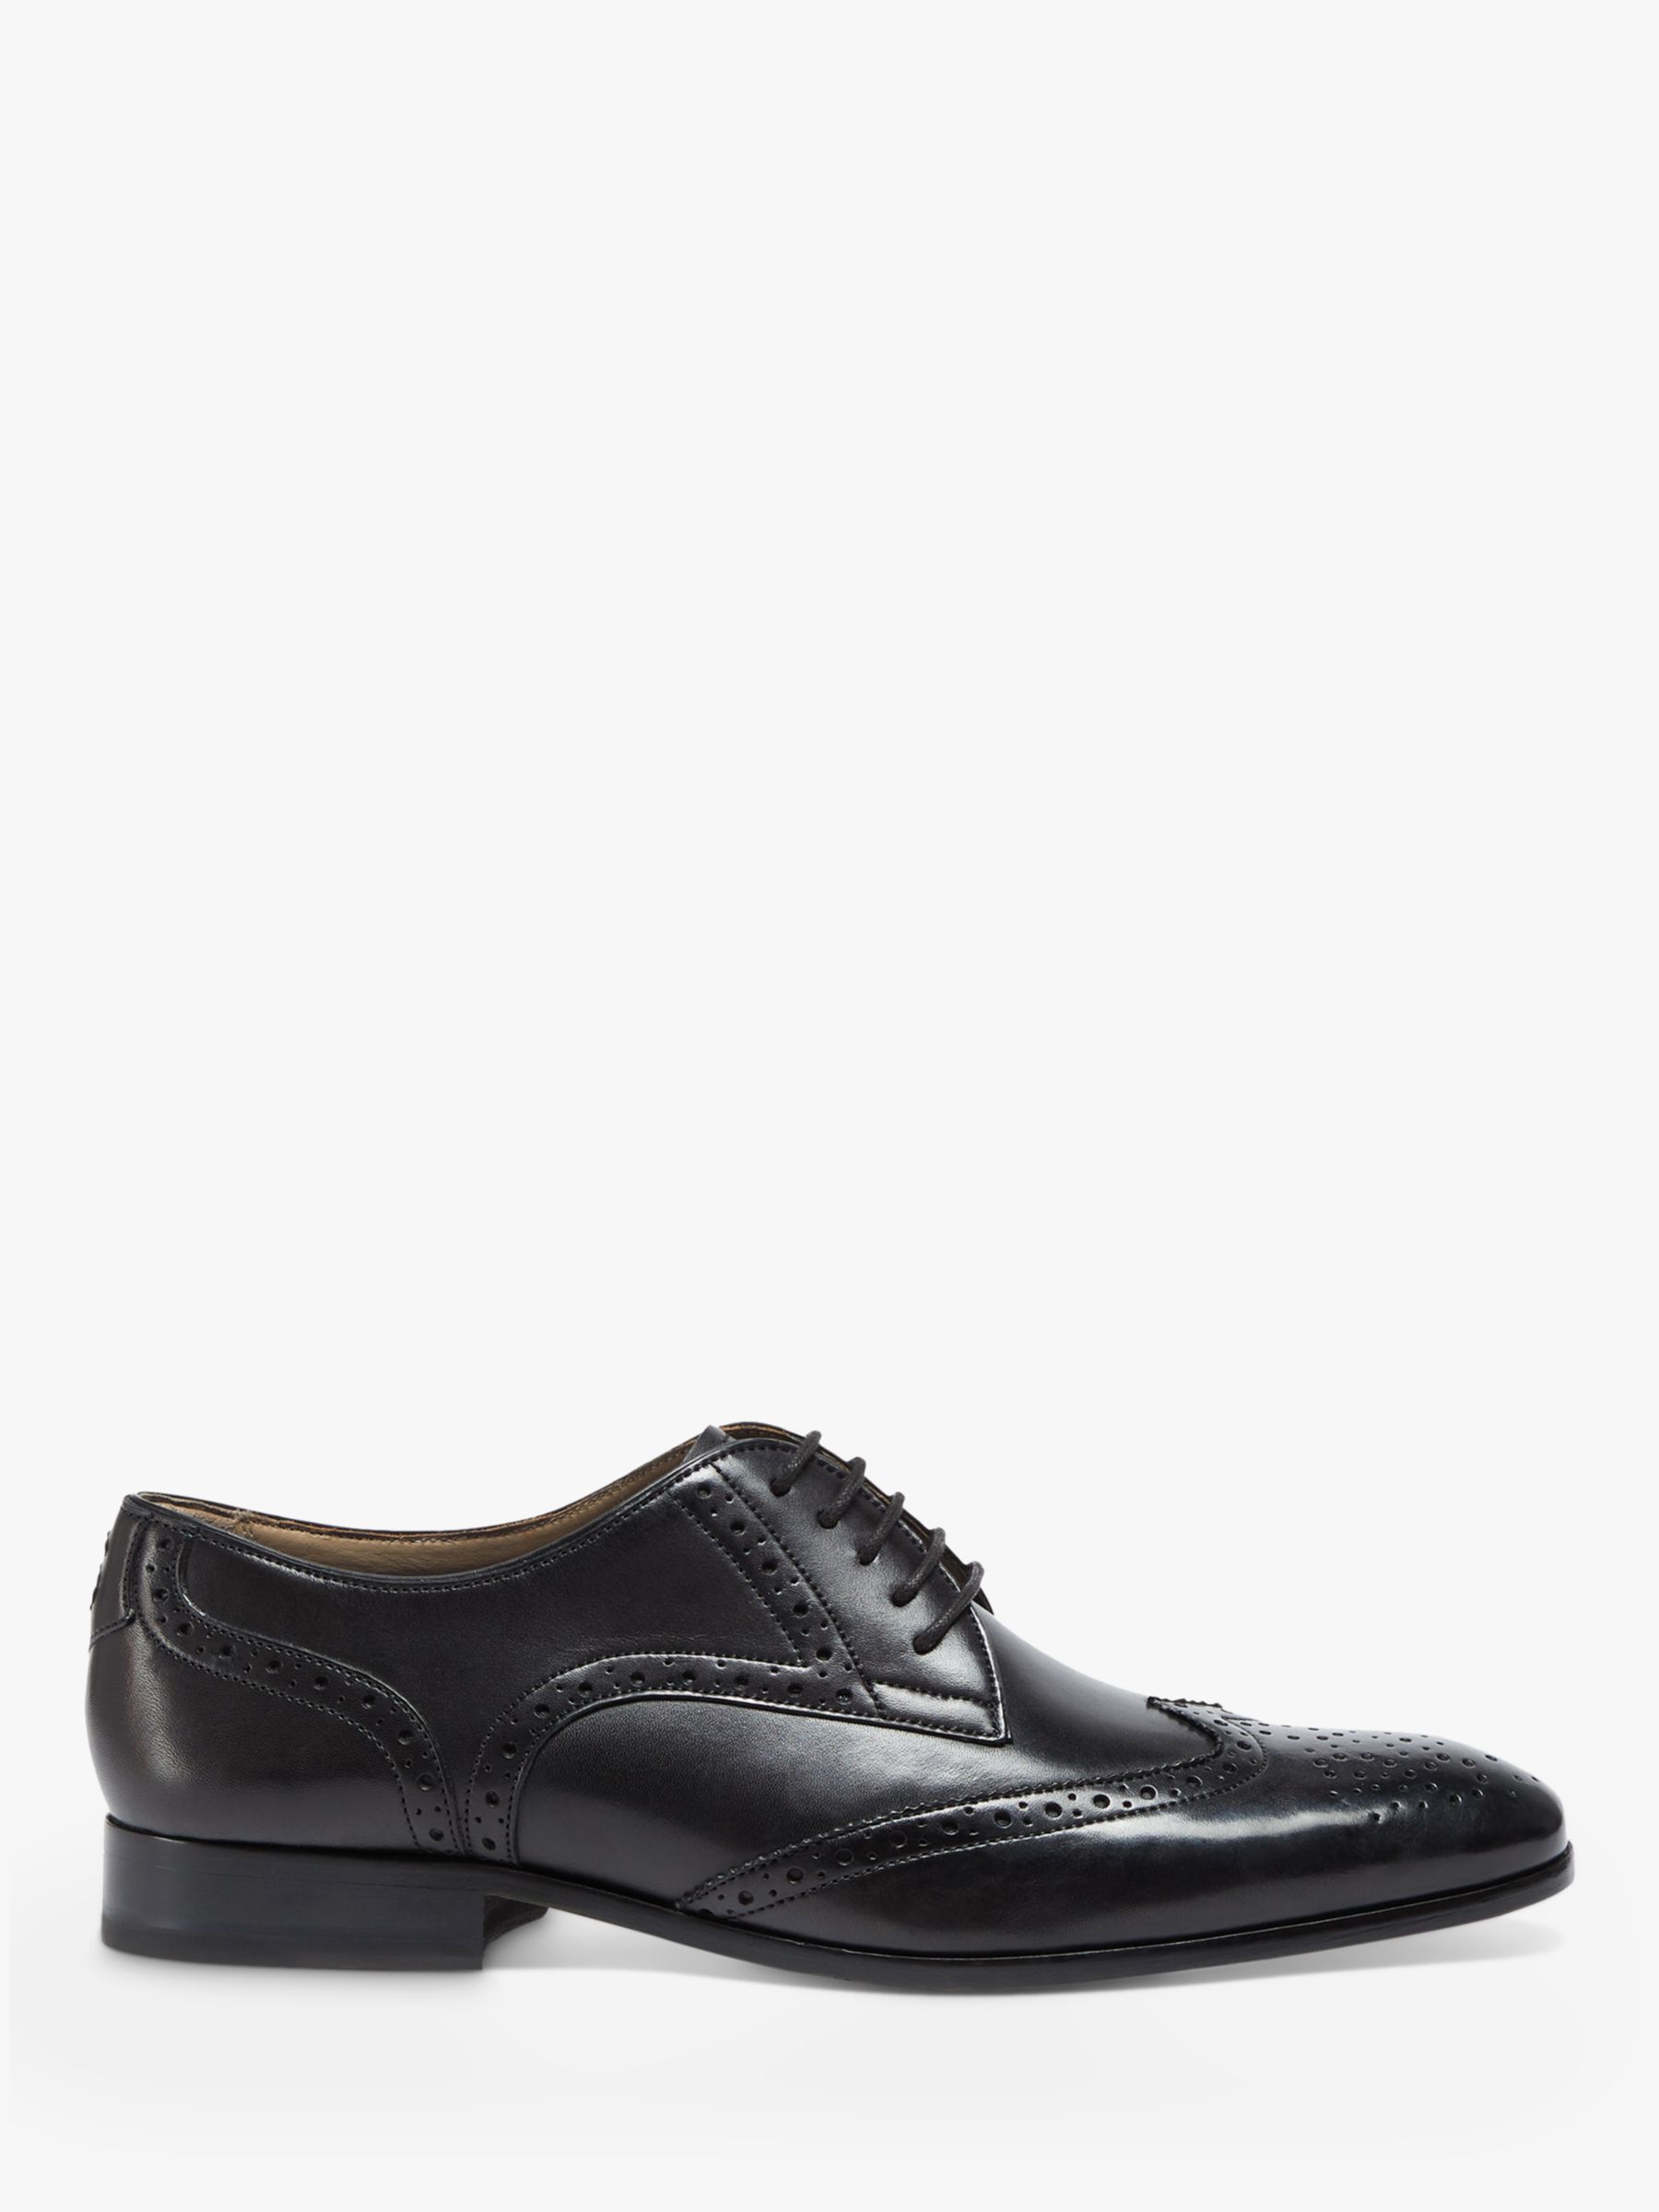 Oliver Sweeney Fressingfield Derby Brogue Shoes, Black, 7